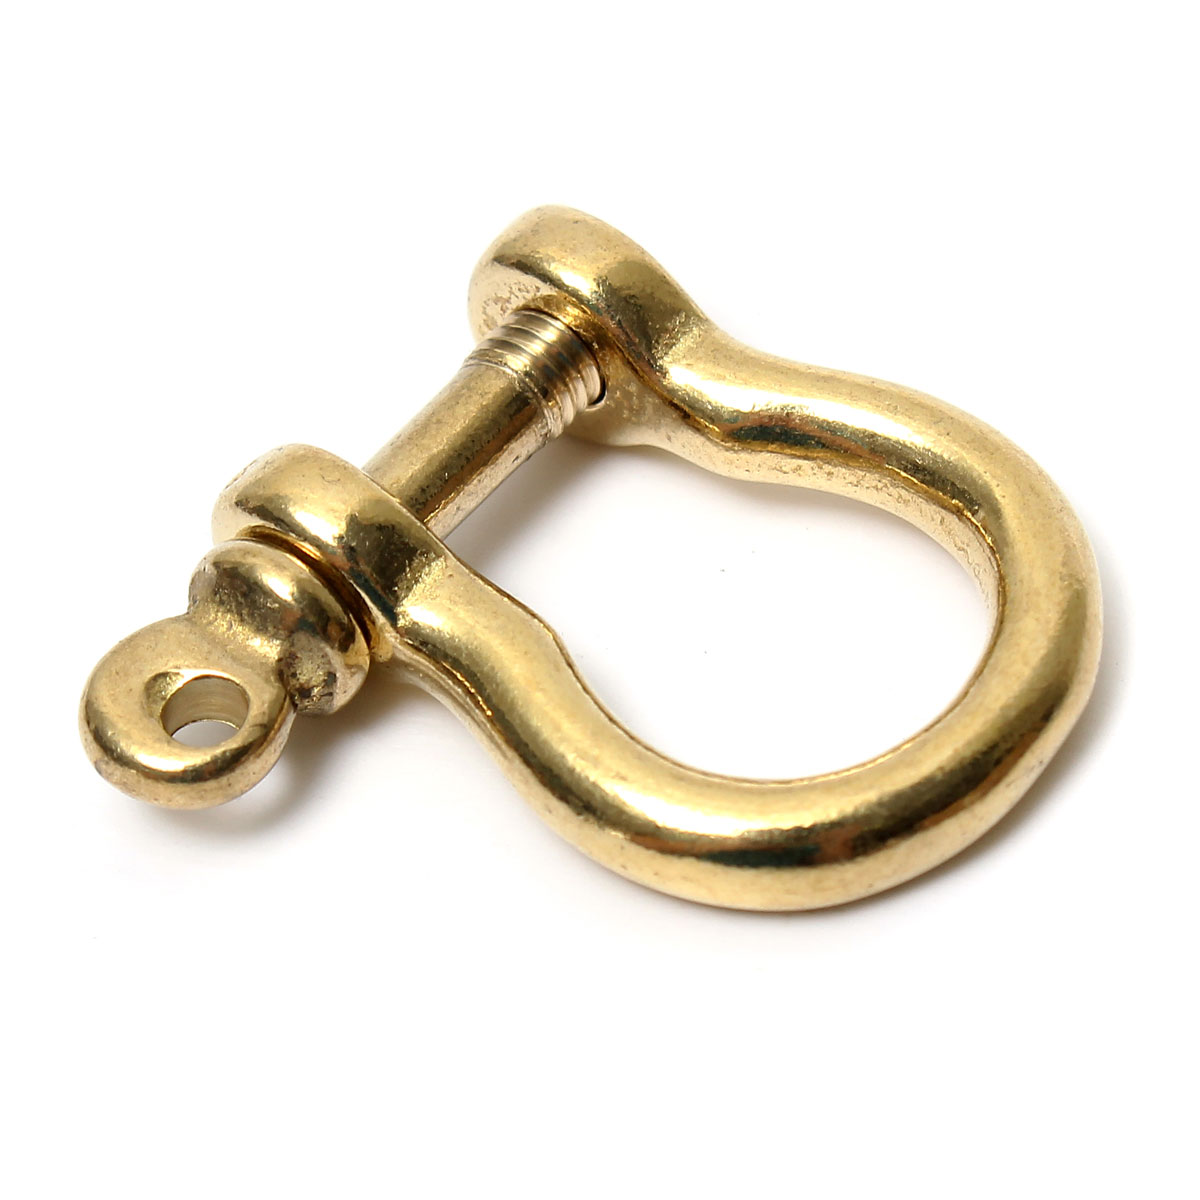 Brass-Ring-Bow-Shackle-Joint-Connect-Key-Chain-Hook-Buckle-DIY-Leather-Craft-Hardware-1256566